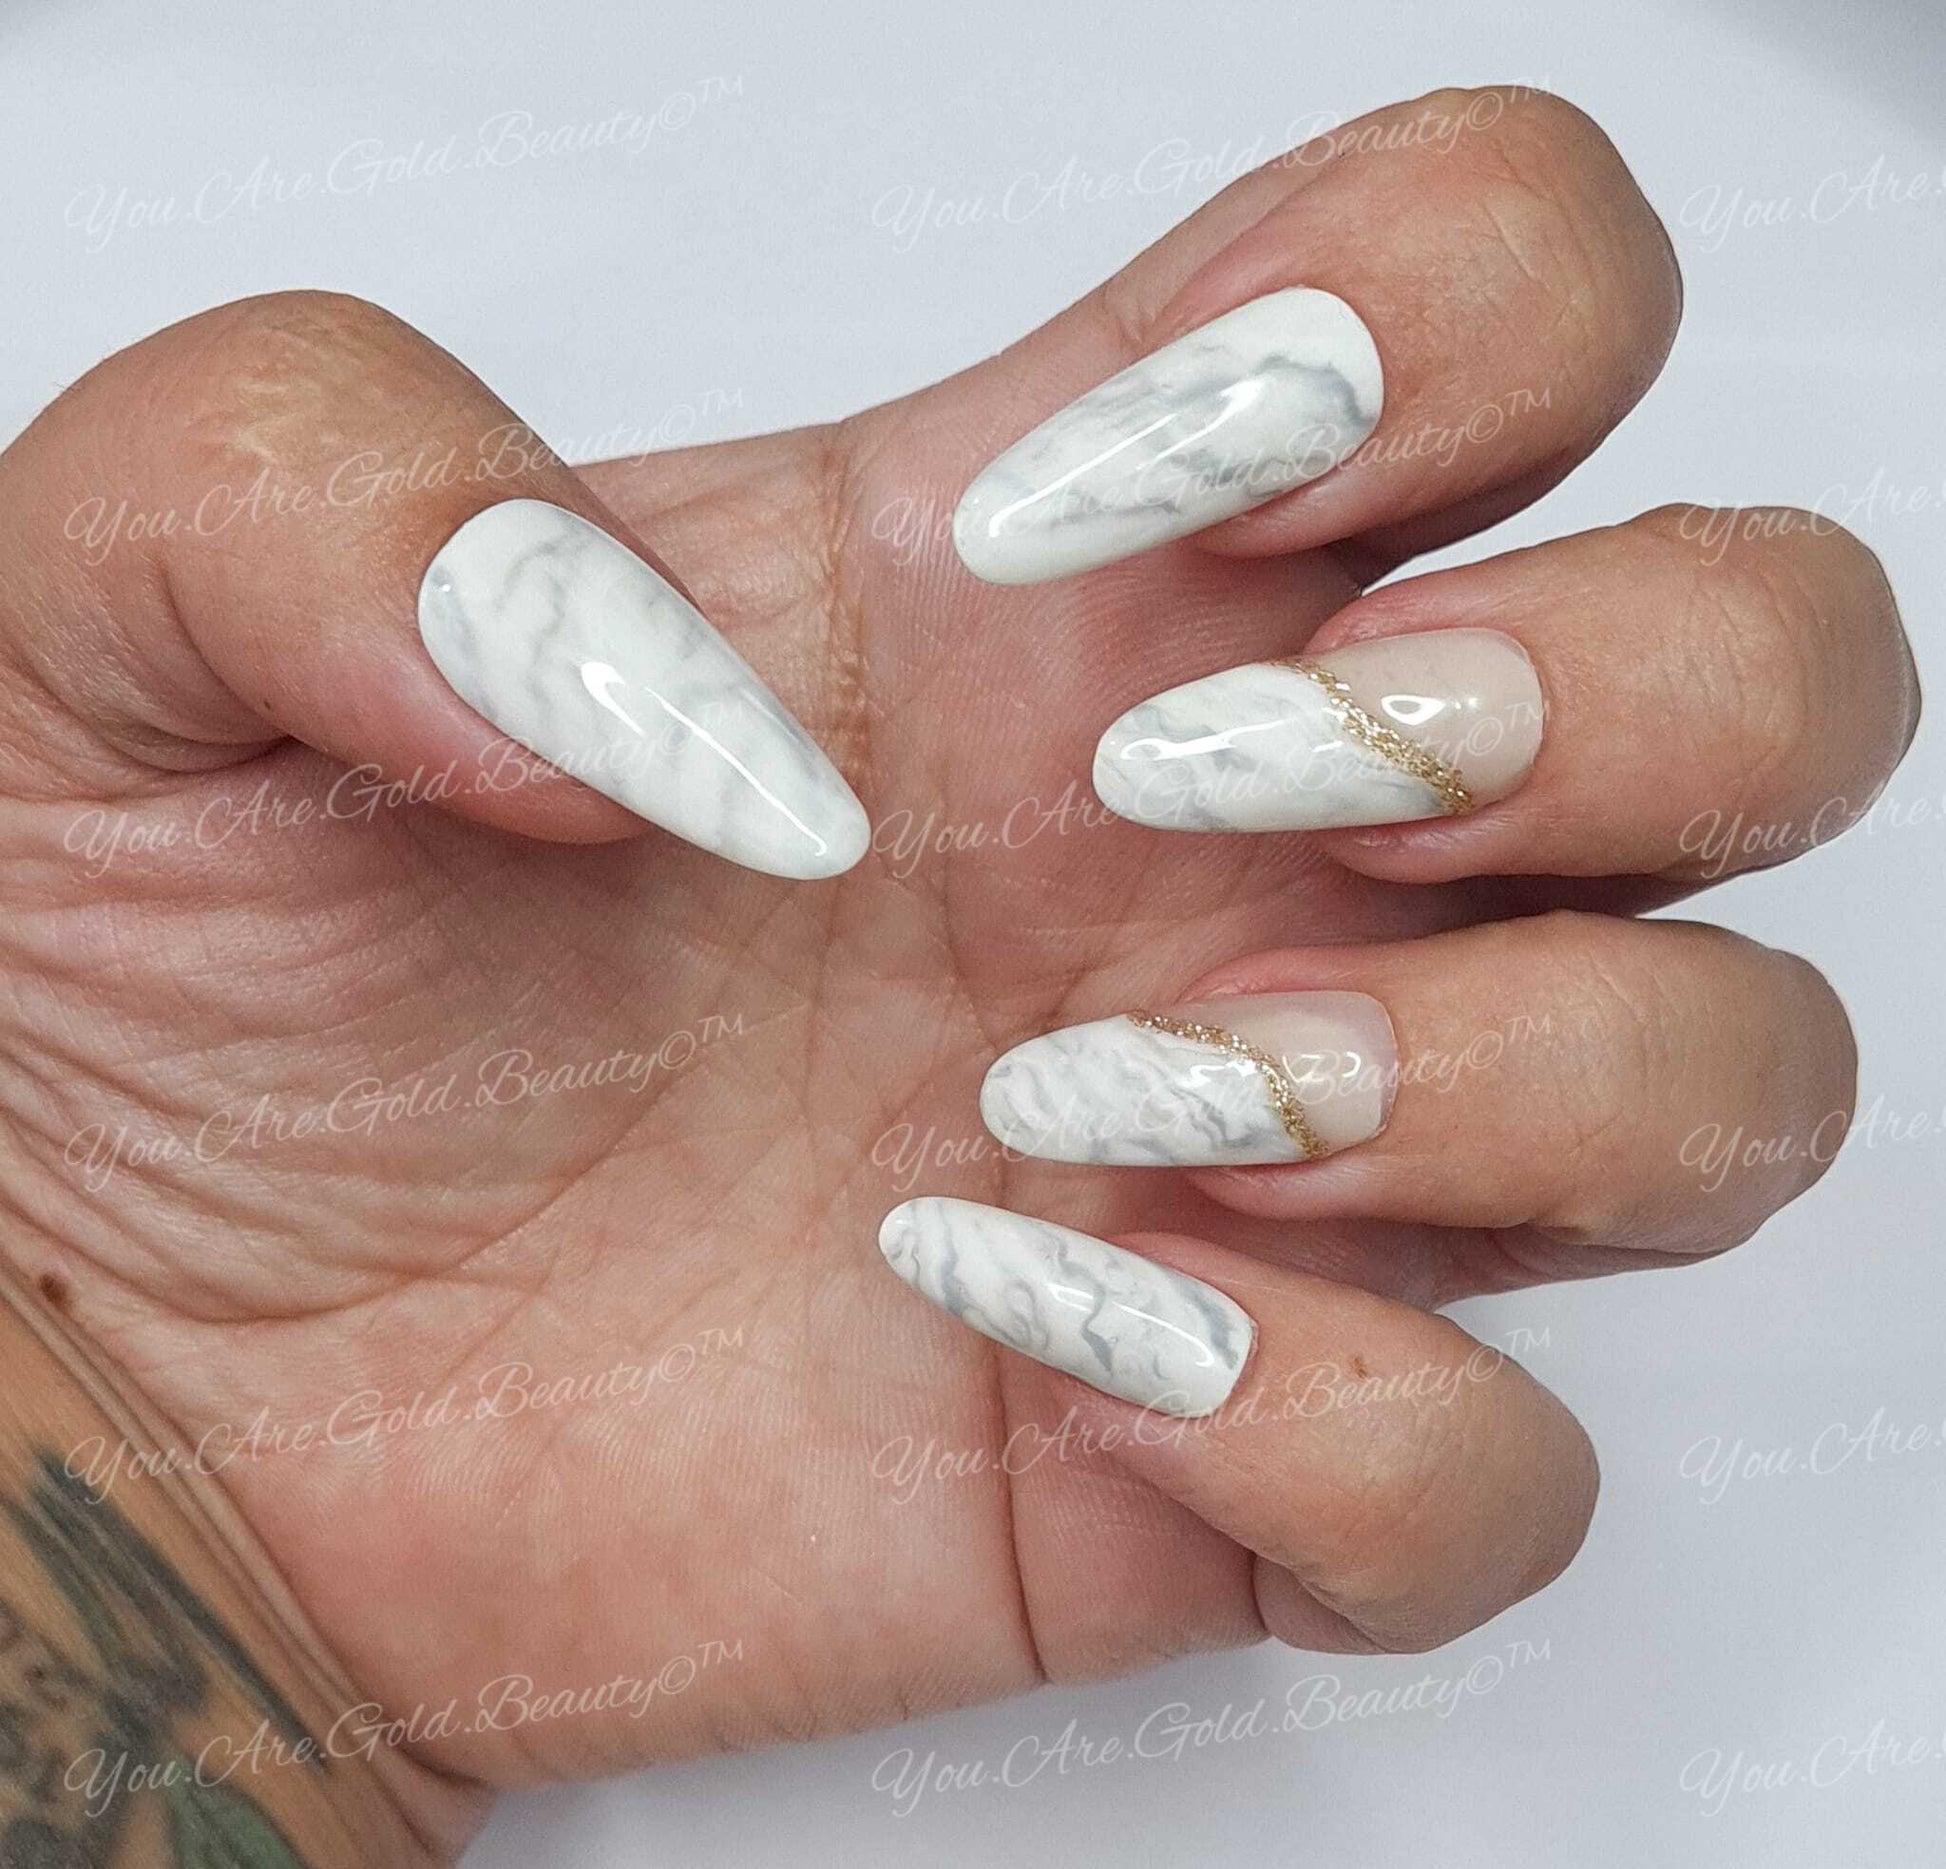 Marble nails design Press on nails uk lonf almond shaped nails